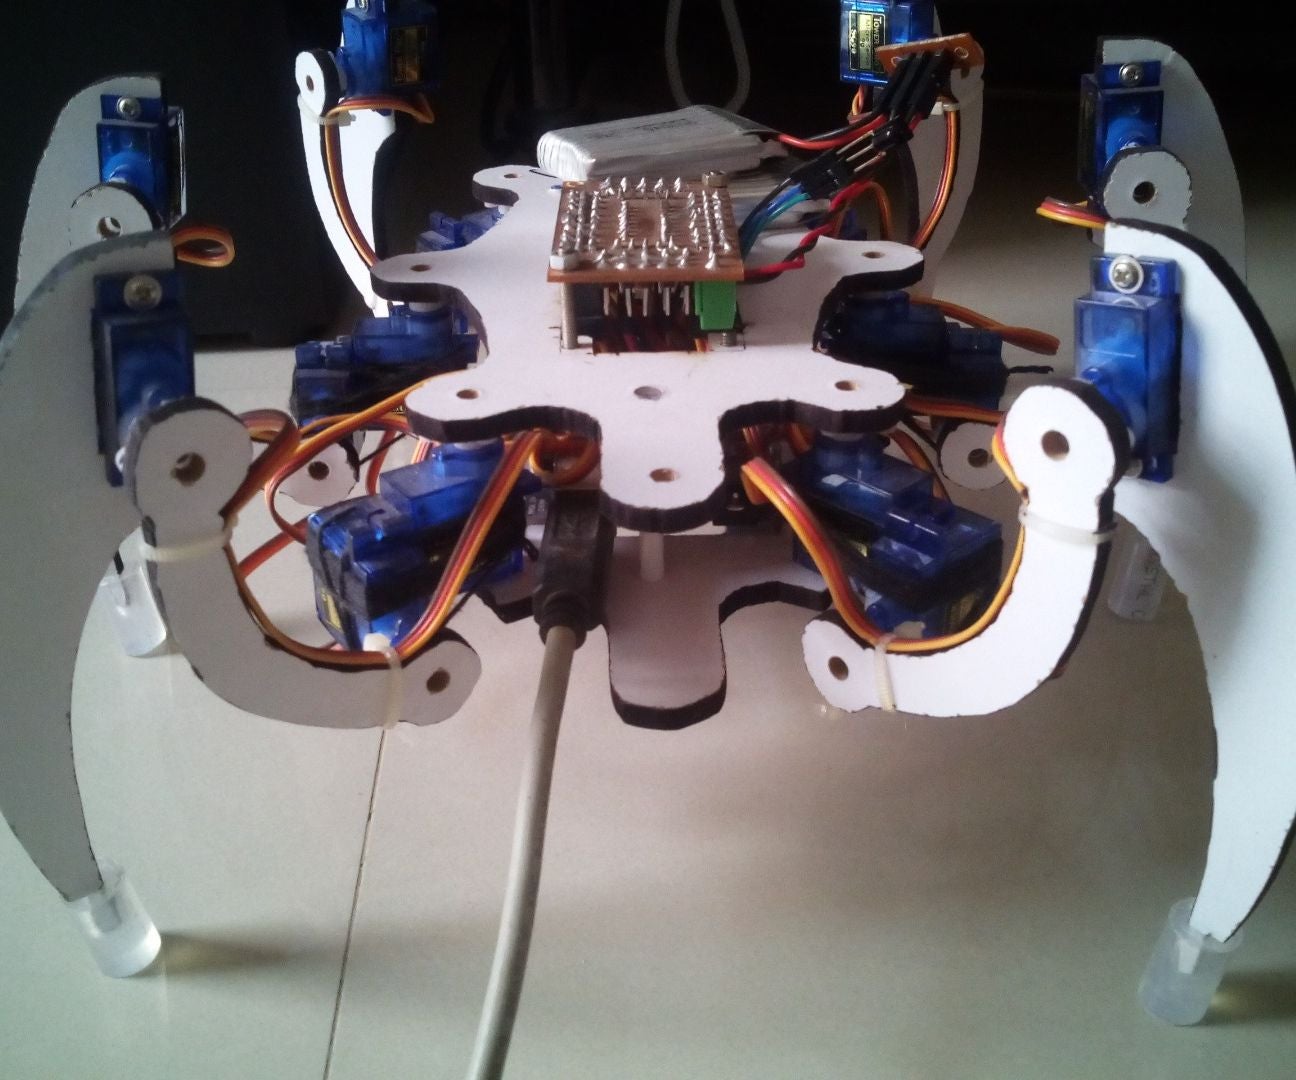 Hexapod Shoe With Hot Glue Stick